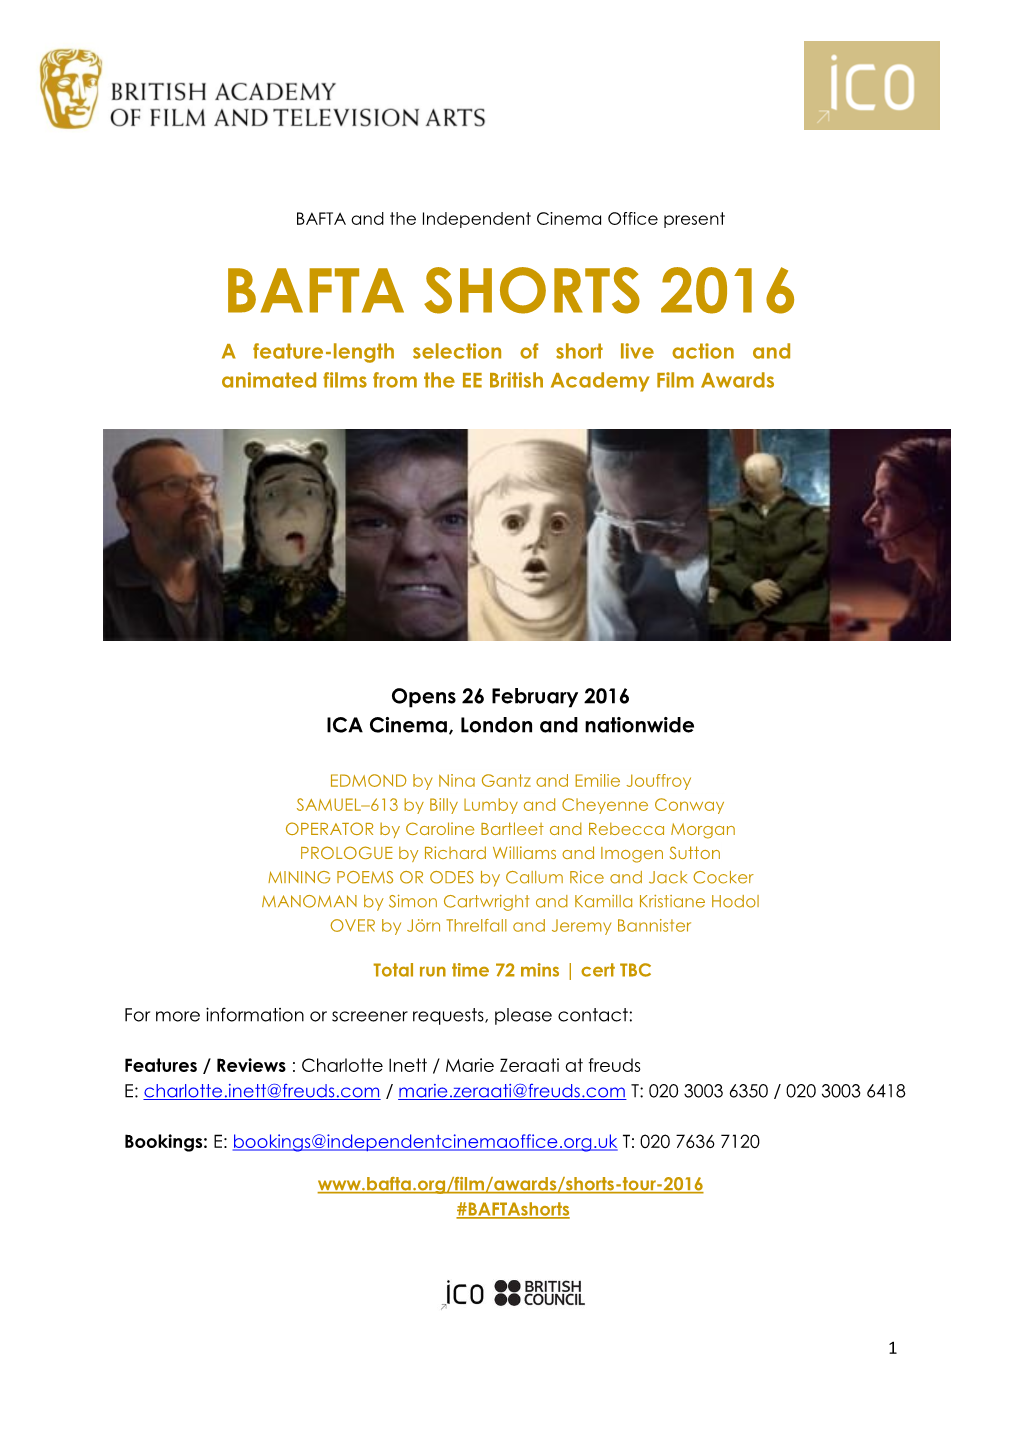 BAFTA SHORTS 2016 a Feature-Length Selection of Short Live Action and Animated Films from the EE British Academy Film Awards